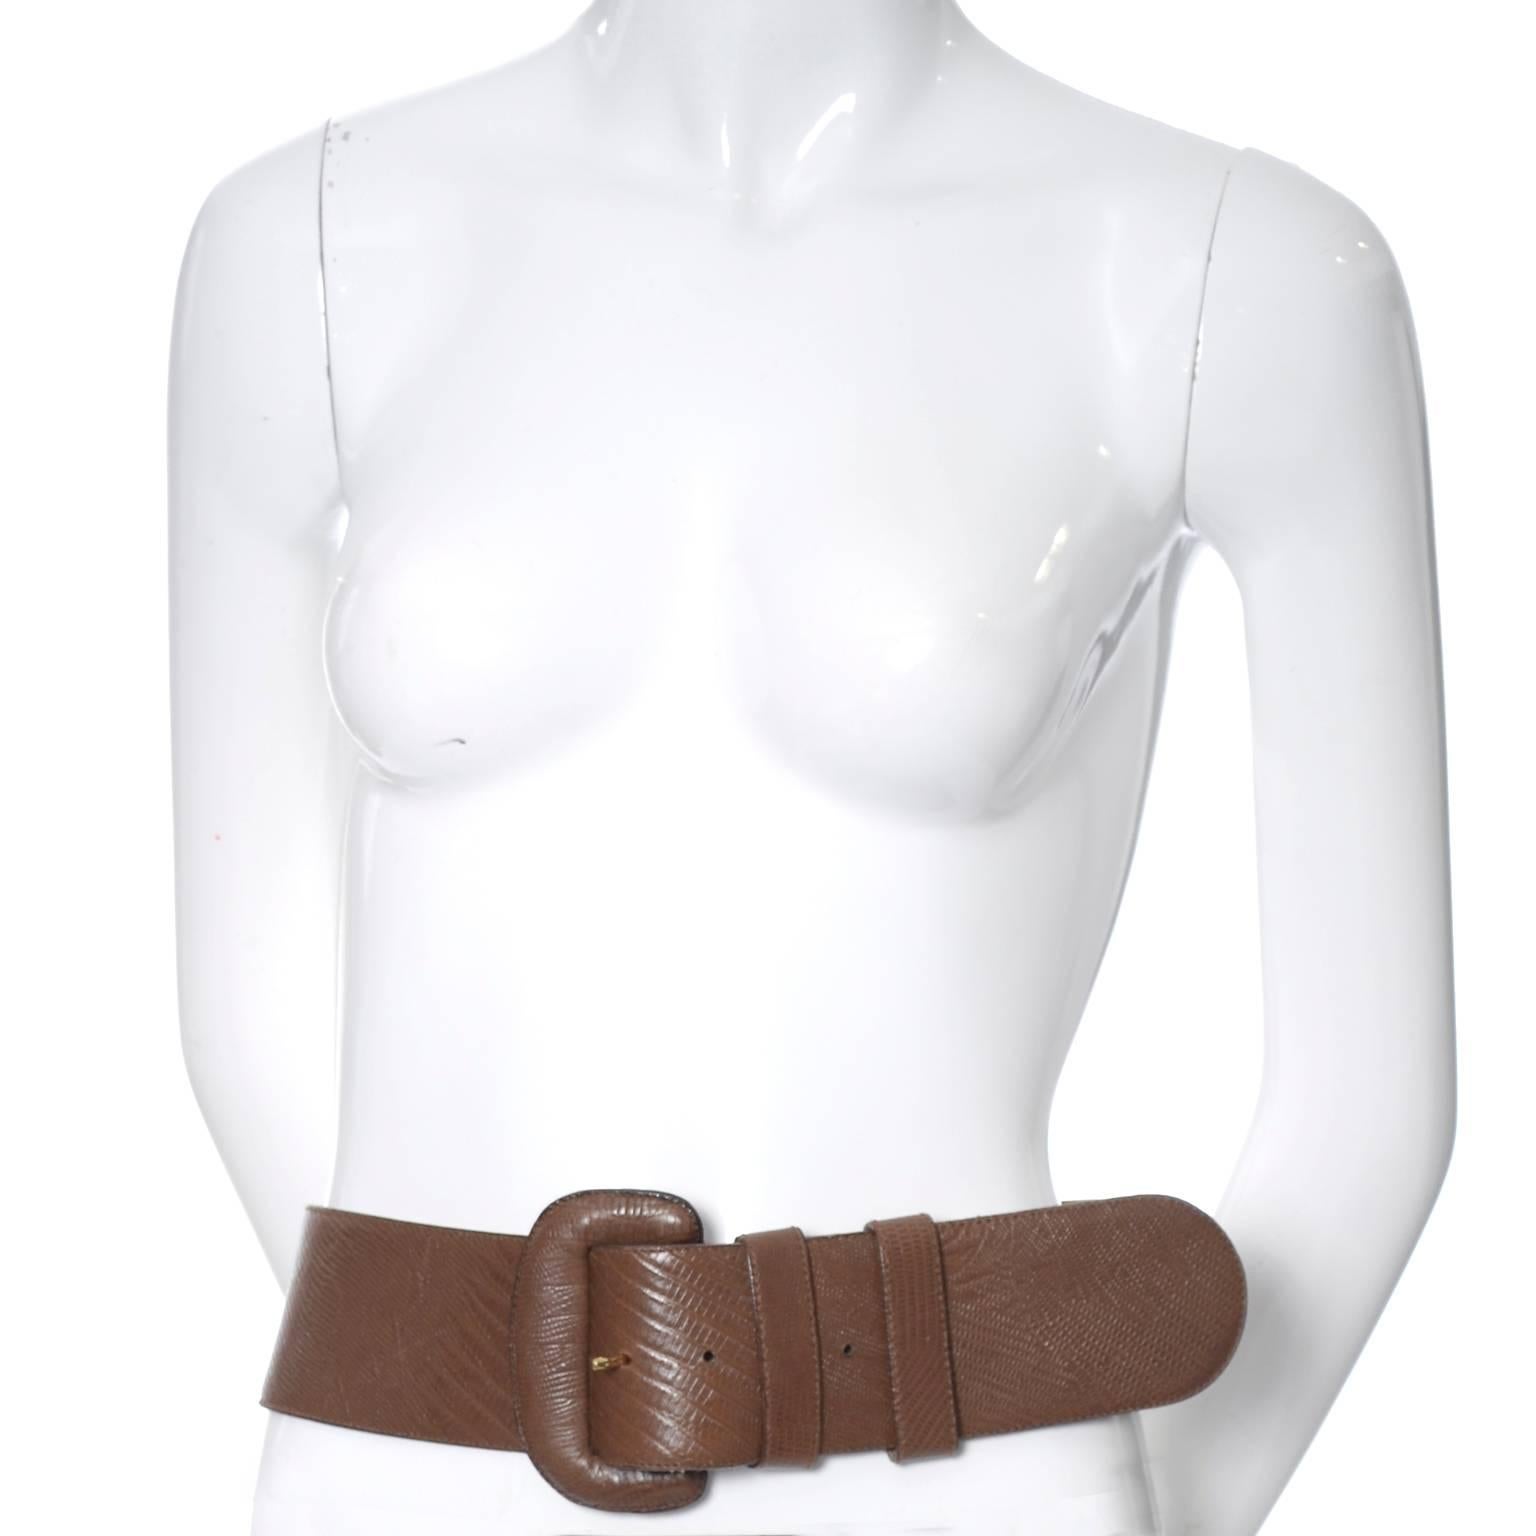 This is a vintage leather belt from Donna Karan. The belt is in excellent, as new condition and was made in Italy in the 1980's.  It is in a pretty brown leather that has been embossed to look like reptile skin. This belt is 2 and 1/2 inches wide,